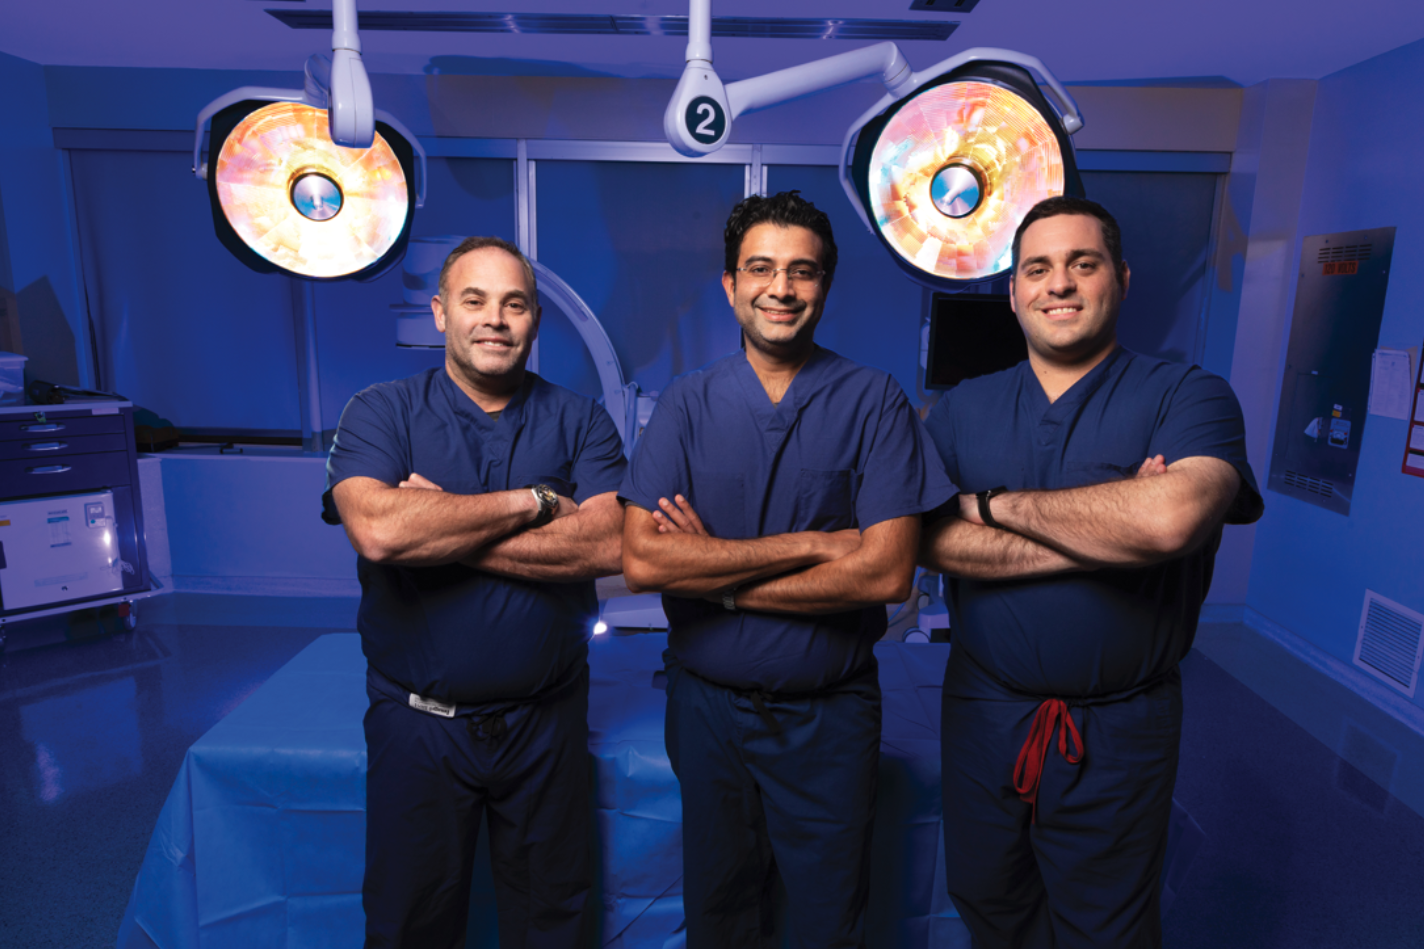 Dr. David Wells-Roth, Dr. Harshpal Singh, Dr. Aaron J. Greenberg standing in operating room